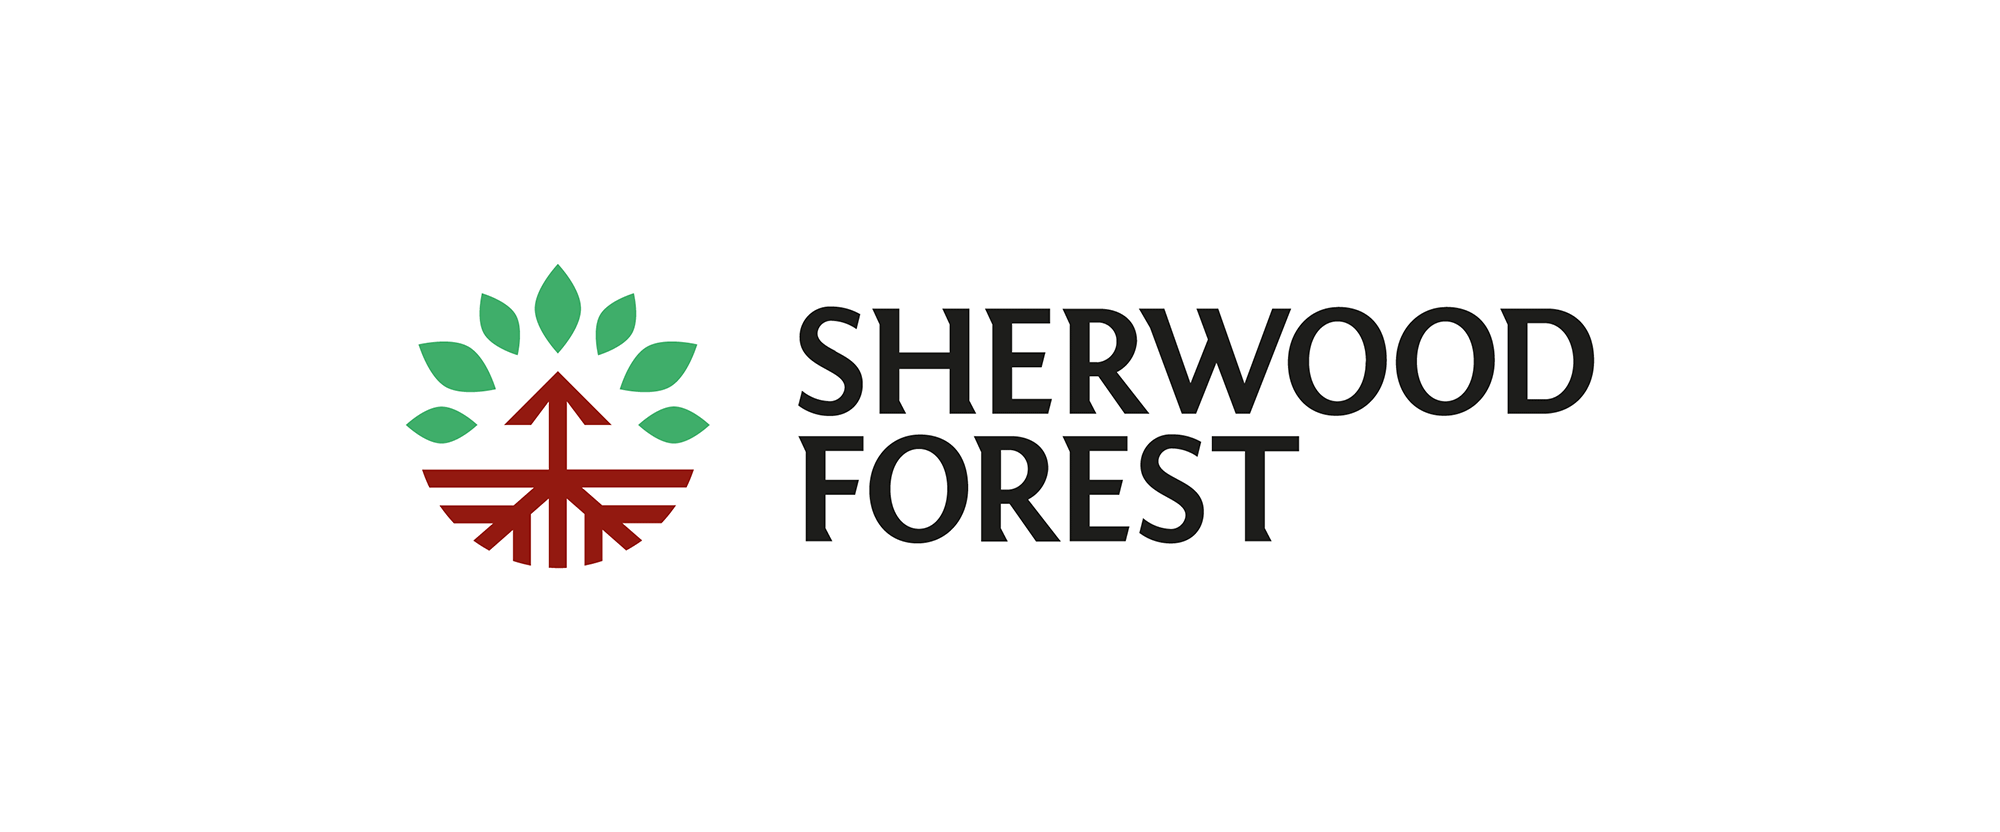 Cafeteria Logo - Brand New: New Logo and Identity for Sherwood Forest by Cafeteria